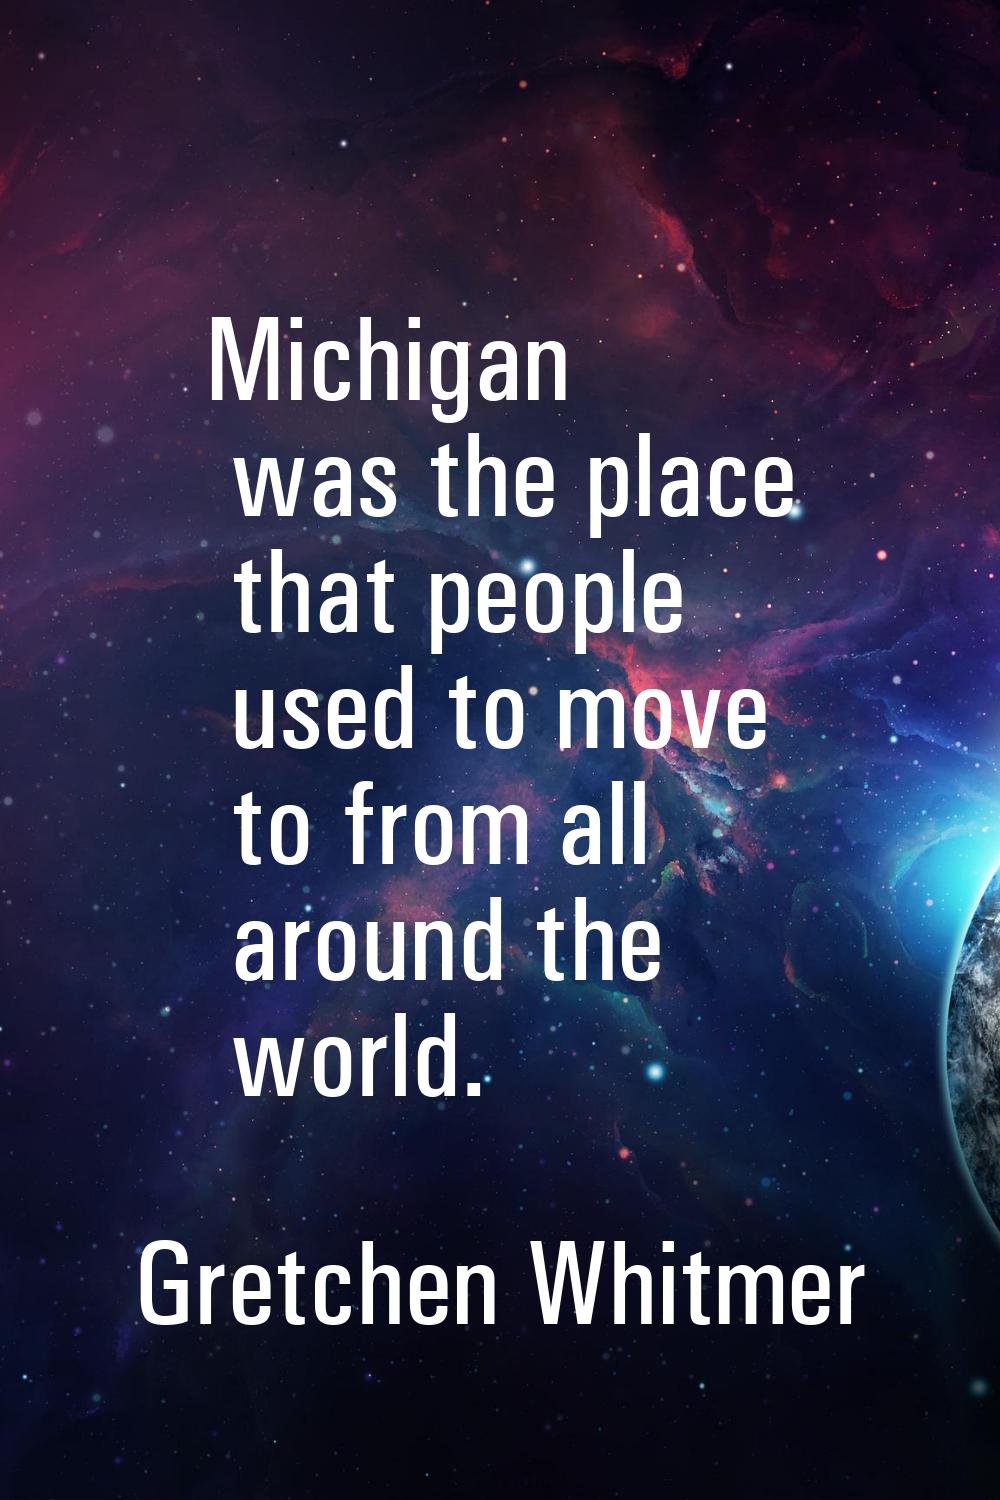 Michigan was the place that people used to move to from all around the world.